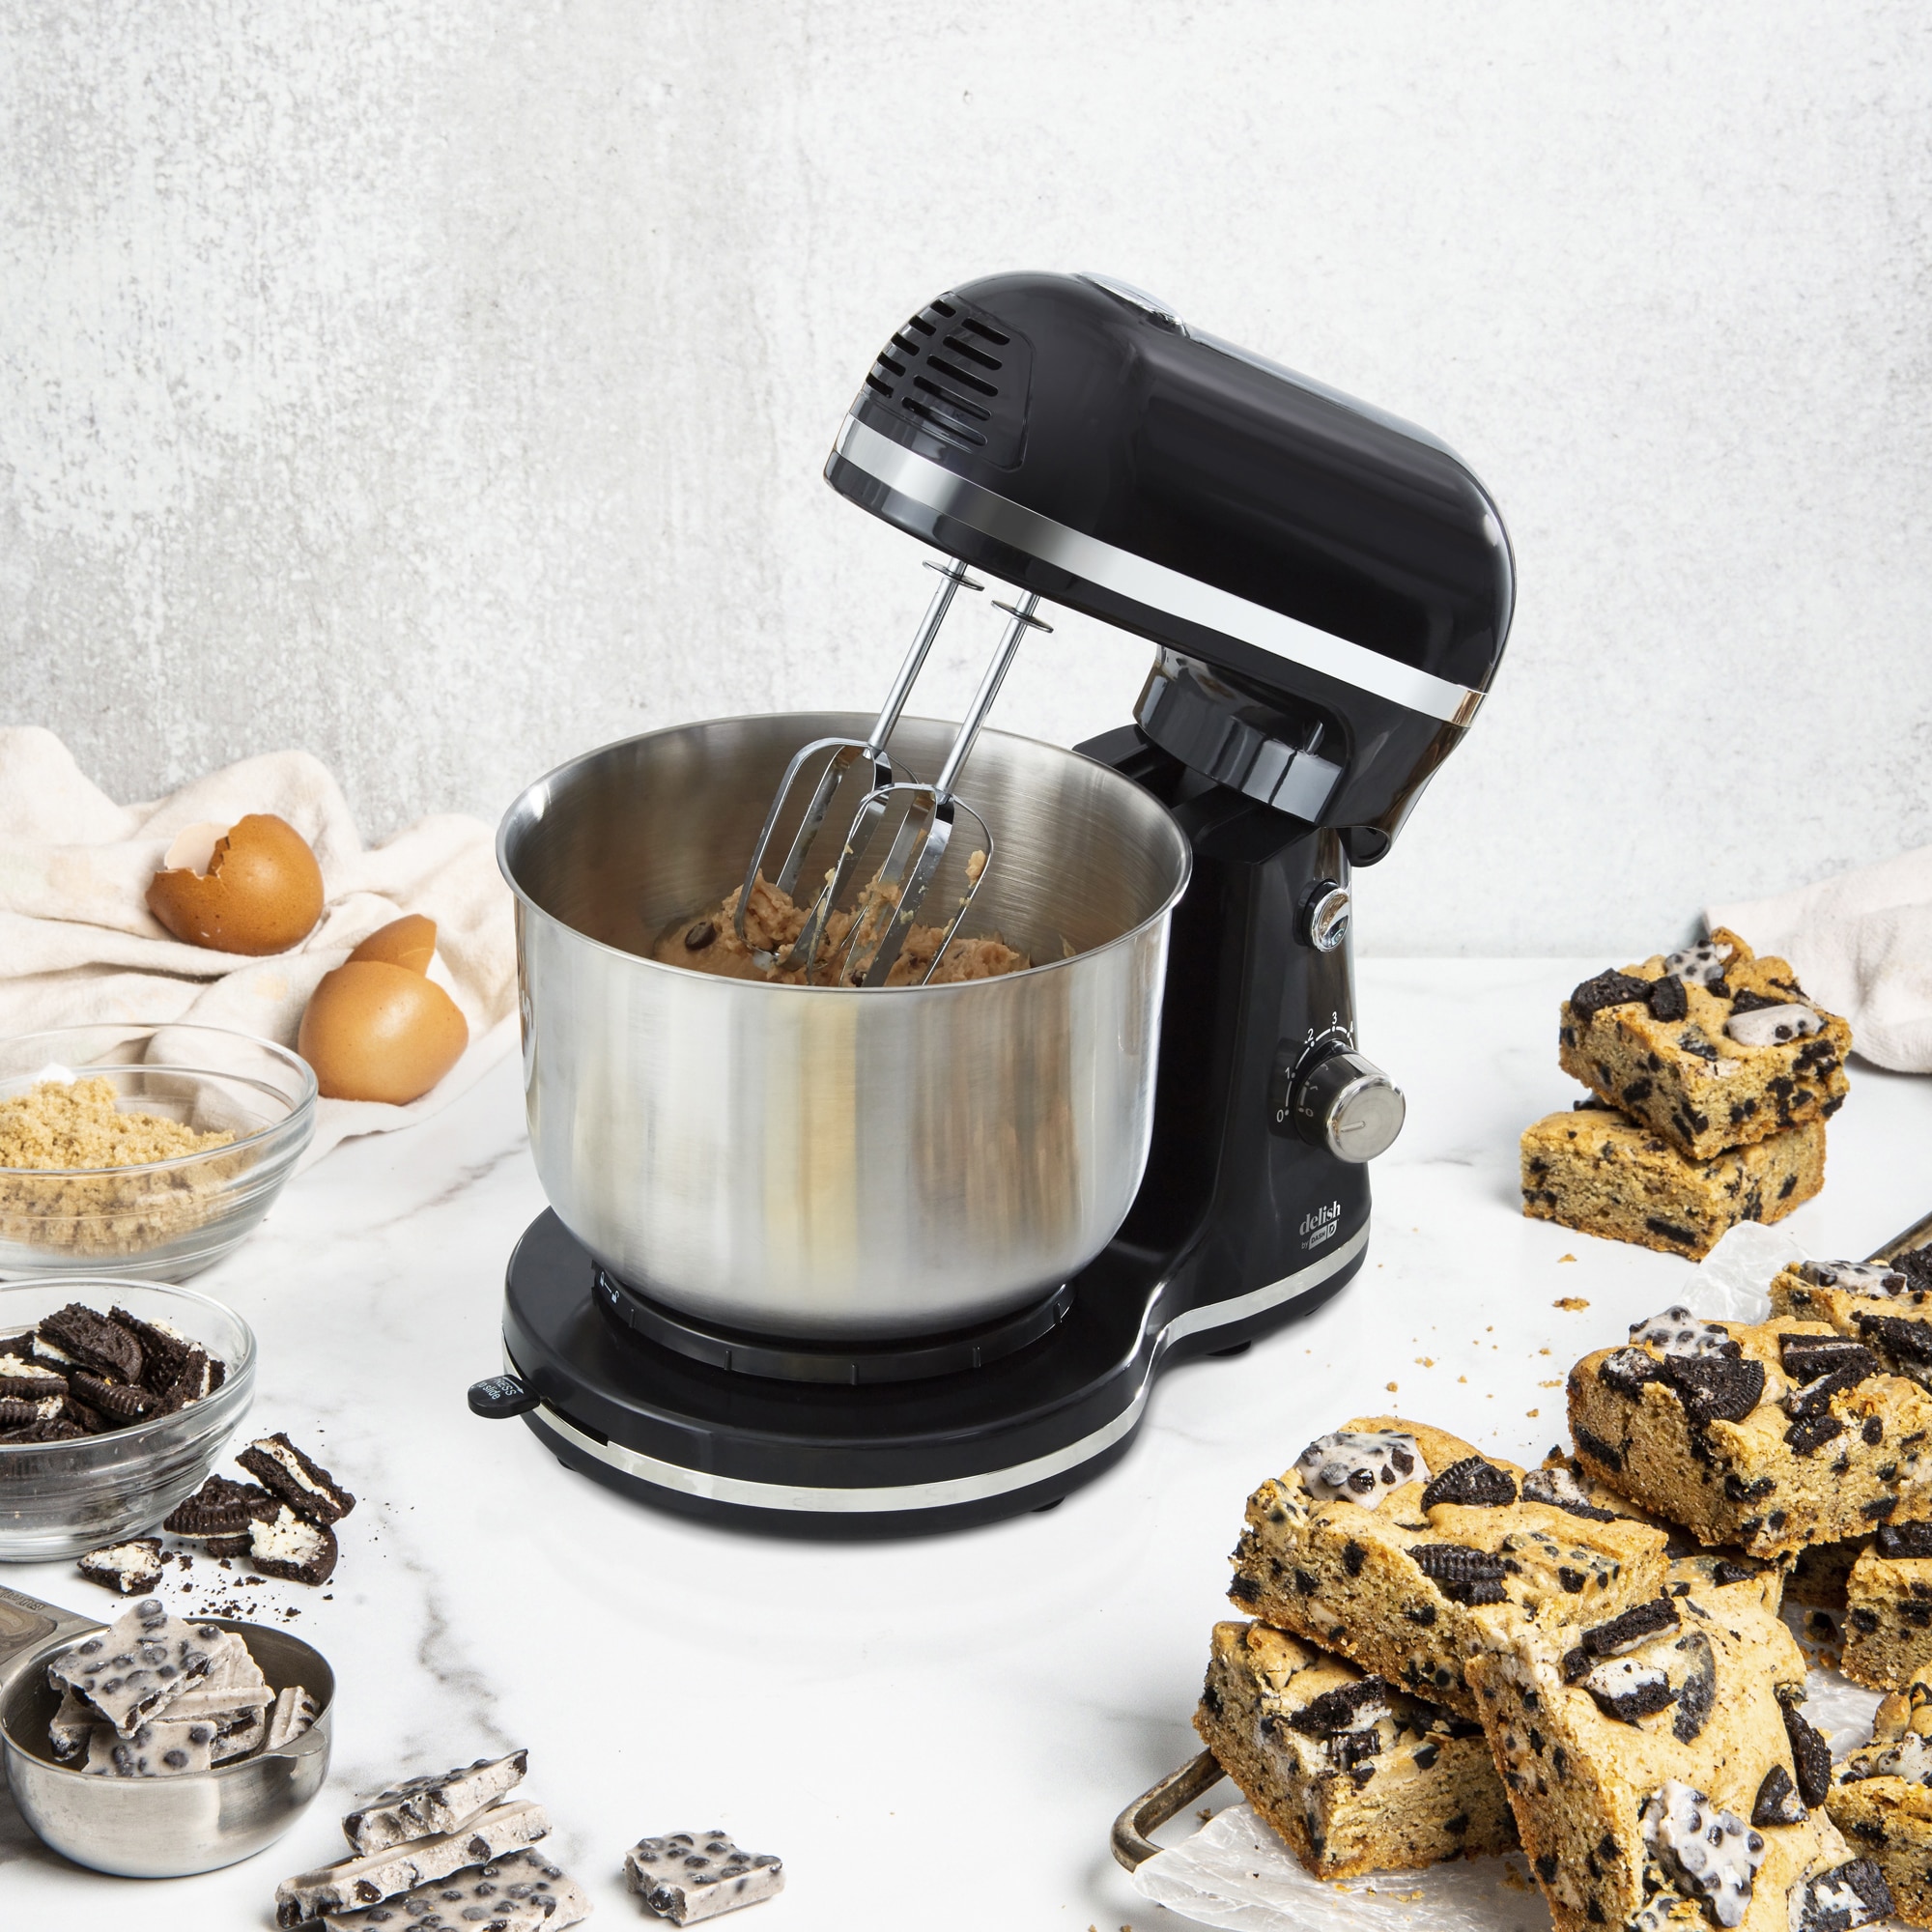 Delish by Dash Compact Stand Mixer Aqua 3.5 Quart with Beaters & Dough Hooks Included 